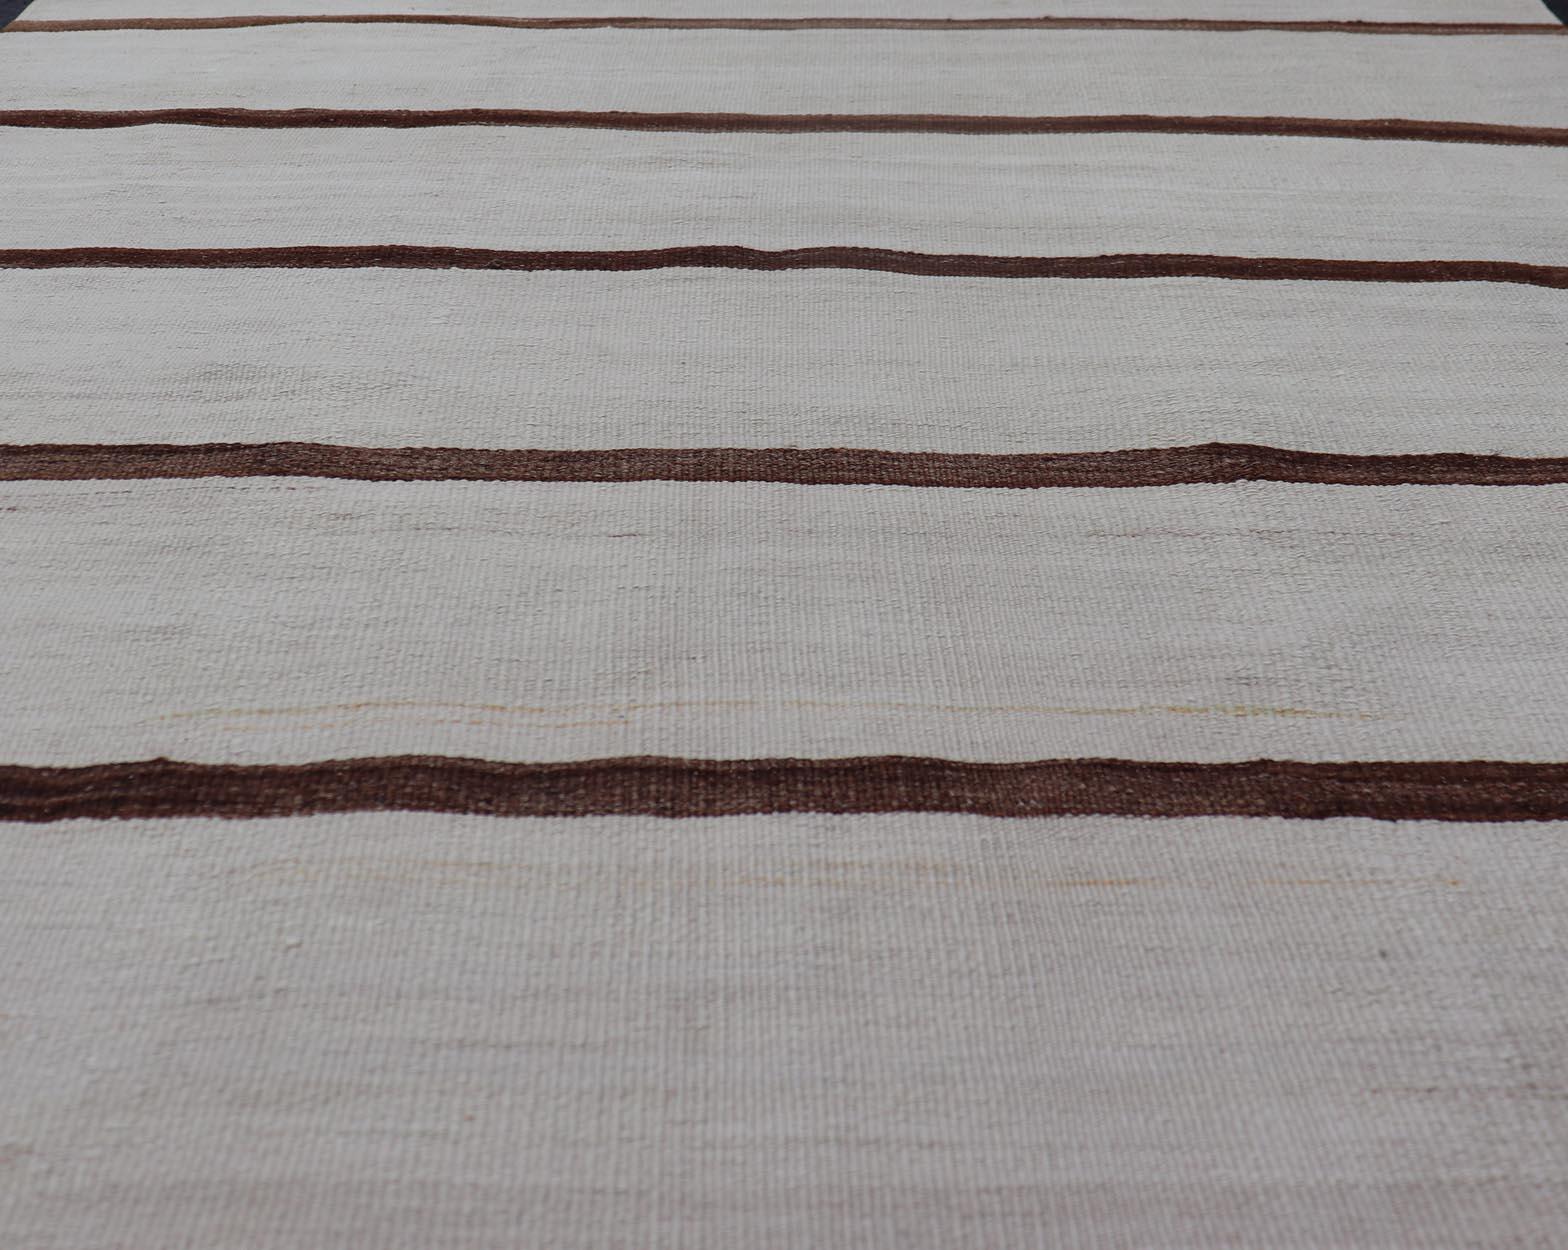 Turkish Vintage Kilim in Shades of Brown and Ivory with Stripe Design For Sale 1